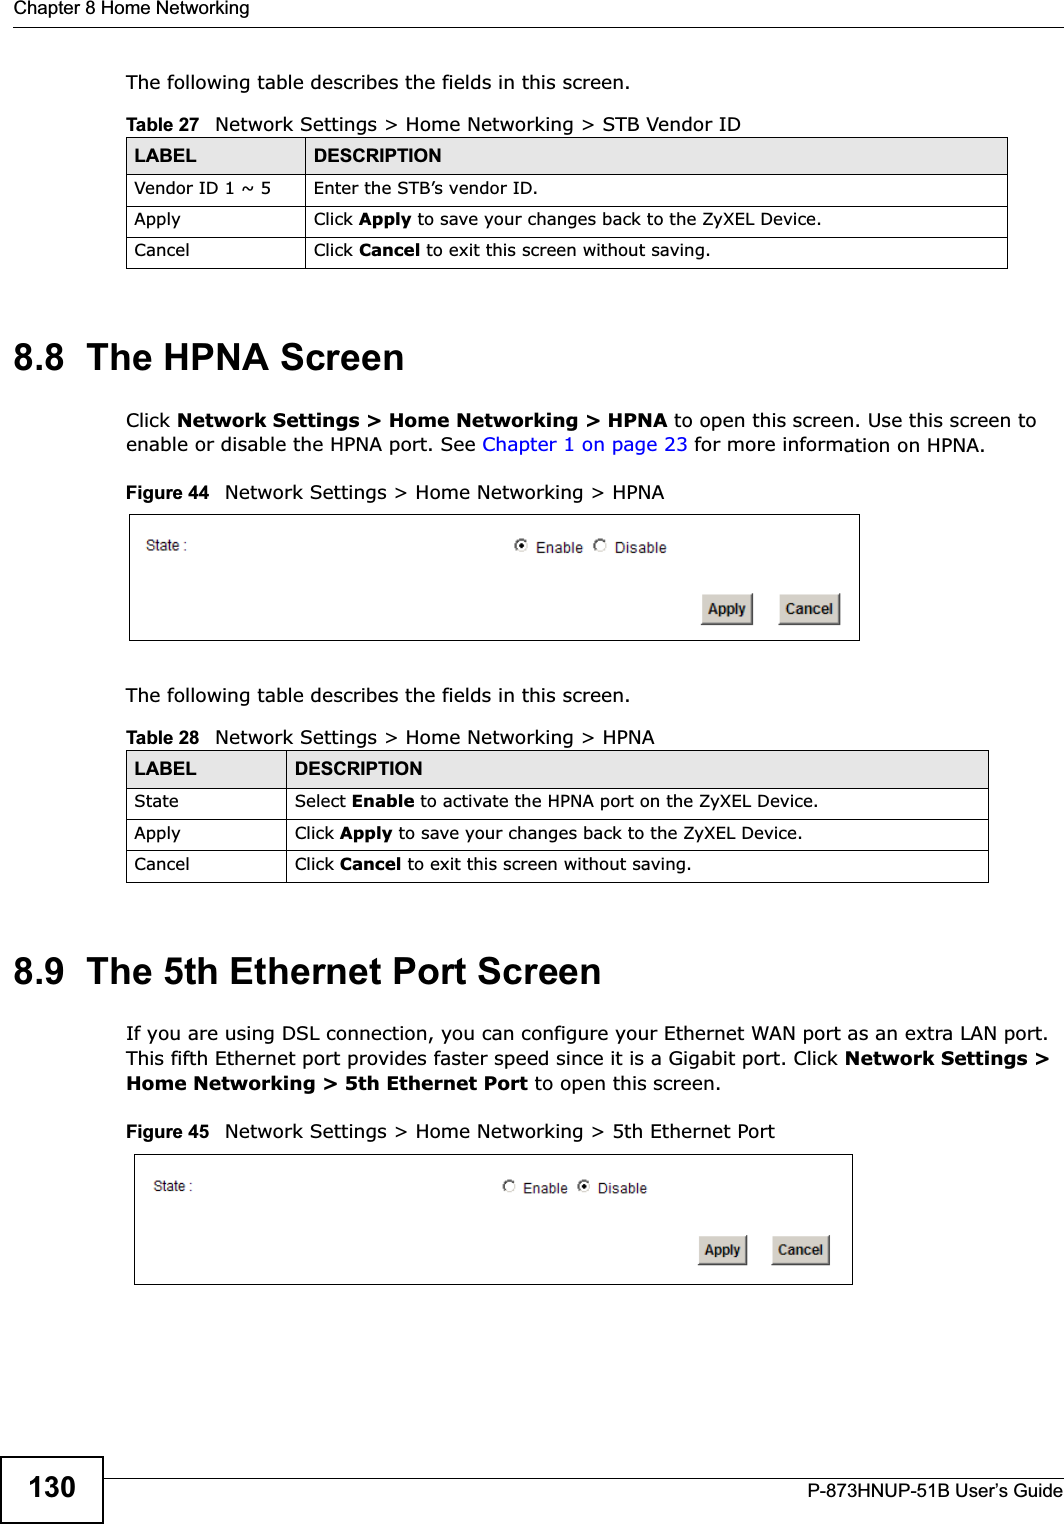 Chapter 8 Home NetworkingP-873HNUP-51B User’s Guide130The following table describes the fields in this screen.  8.8  The HPNA ScreenClick Network Settings &gt; Home Networking &gt; HPNA to open this screen. Use this screen to enable or disable the HPNA port. See Chapter 1 on page 23 for more information on HPNA.Figure 44   Network Settings &gt; Home Networking &gt; HPNAThe following table describes the fields in this screen.  8.9  The 5th Ethernet Port ScreenIf you are using DSL connection, you can configure your Ethernet WAN port as an extra LAN port. This fifth Ethernet port provides faster speed since it is a Gigabit port. Click Network Settings &gt; Home Networking &gt; 5th Ethernet Port to open this screen.Figure 45   Network Settings &gt; Home Networking &gt; 5th Ethernet PortTable 27   Network Settings &gt; Home Networking &gt; STB Vendor IDLABEL DESCRIPTIONVendor ID 1 ~ 5 Enter the STB’s vendor ID. Apply Click Apply to save your changes back to the ZyXEL Device.Cancel Click Cancel to exit this screen without saving.Table 28   Network Settings &gt; Home Networking &gt; HPNALABEL DESCRIPTIONState Select Enable to activate the HPNA port on the ZyXEL Device.Apply Click Apply to save your changes back to the ZyXEL Device.Cancel Click Cancel to exit this screen without saving.